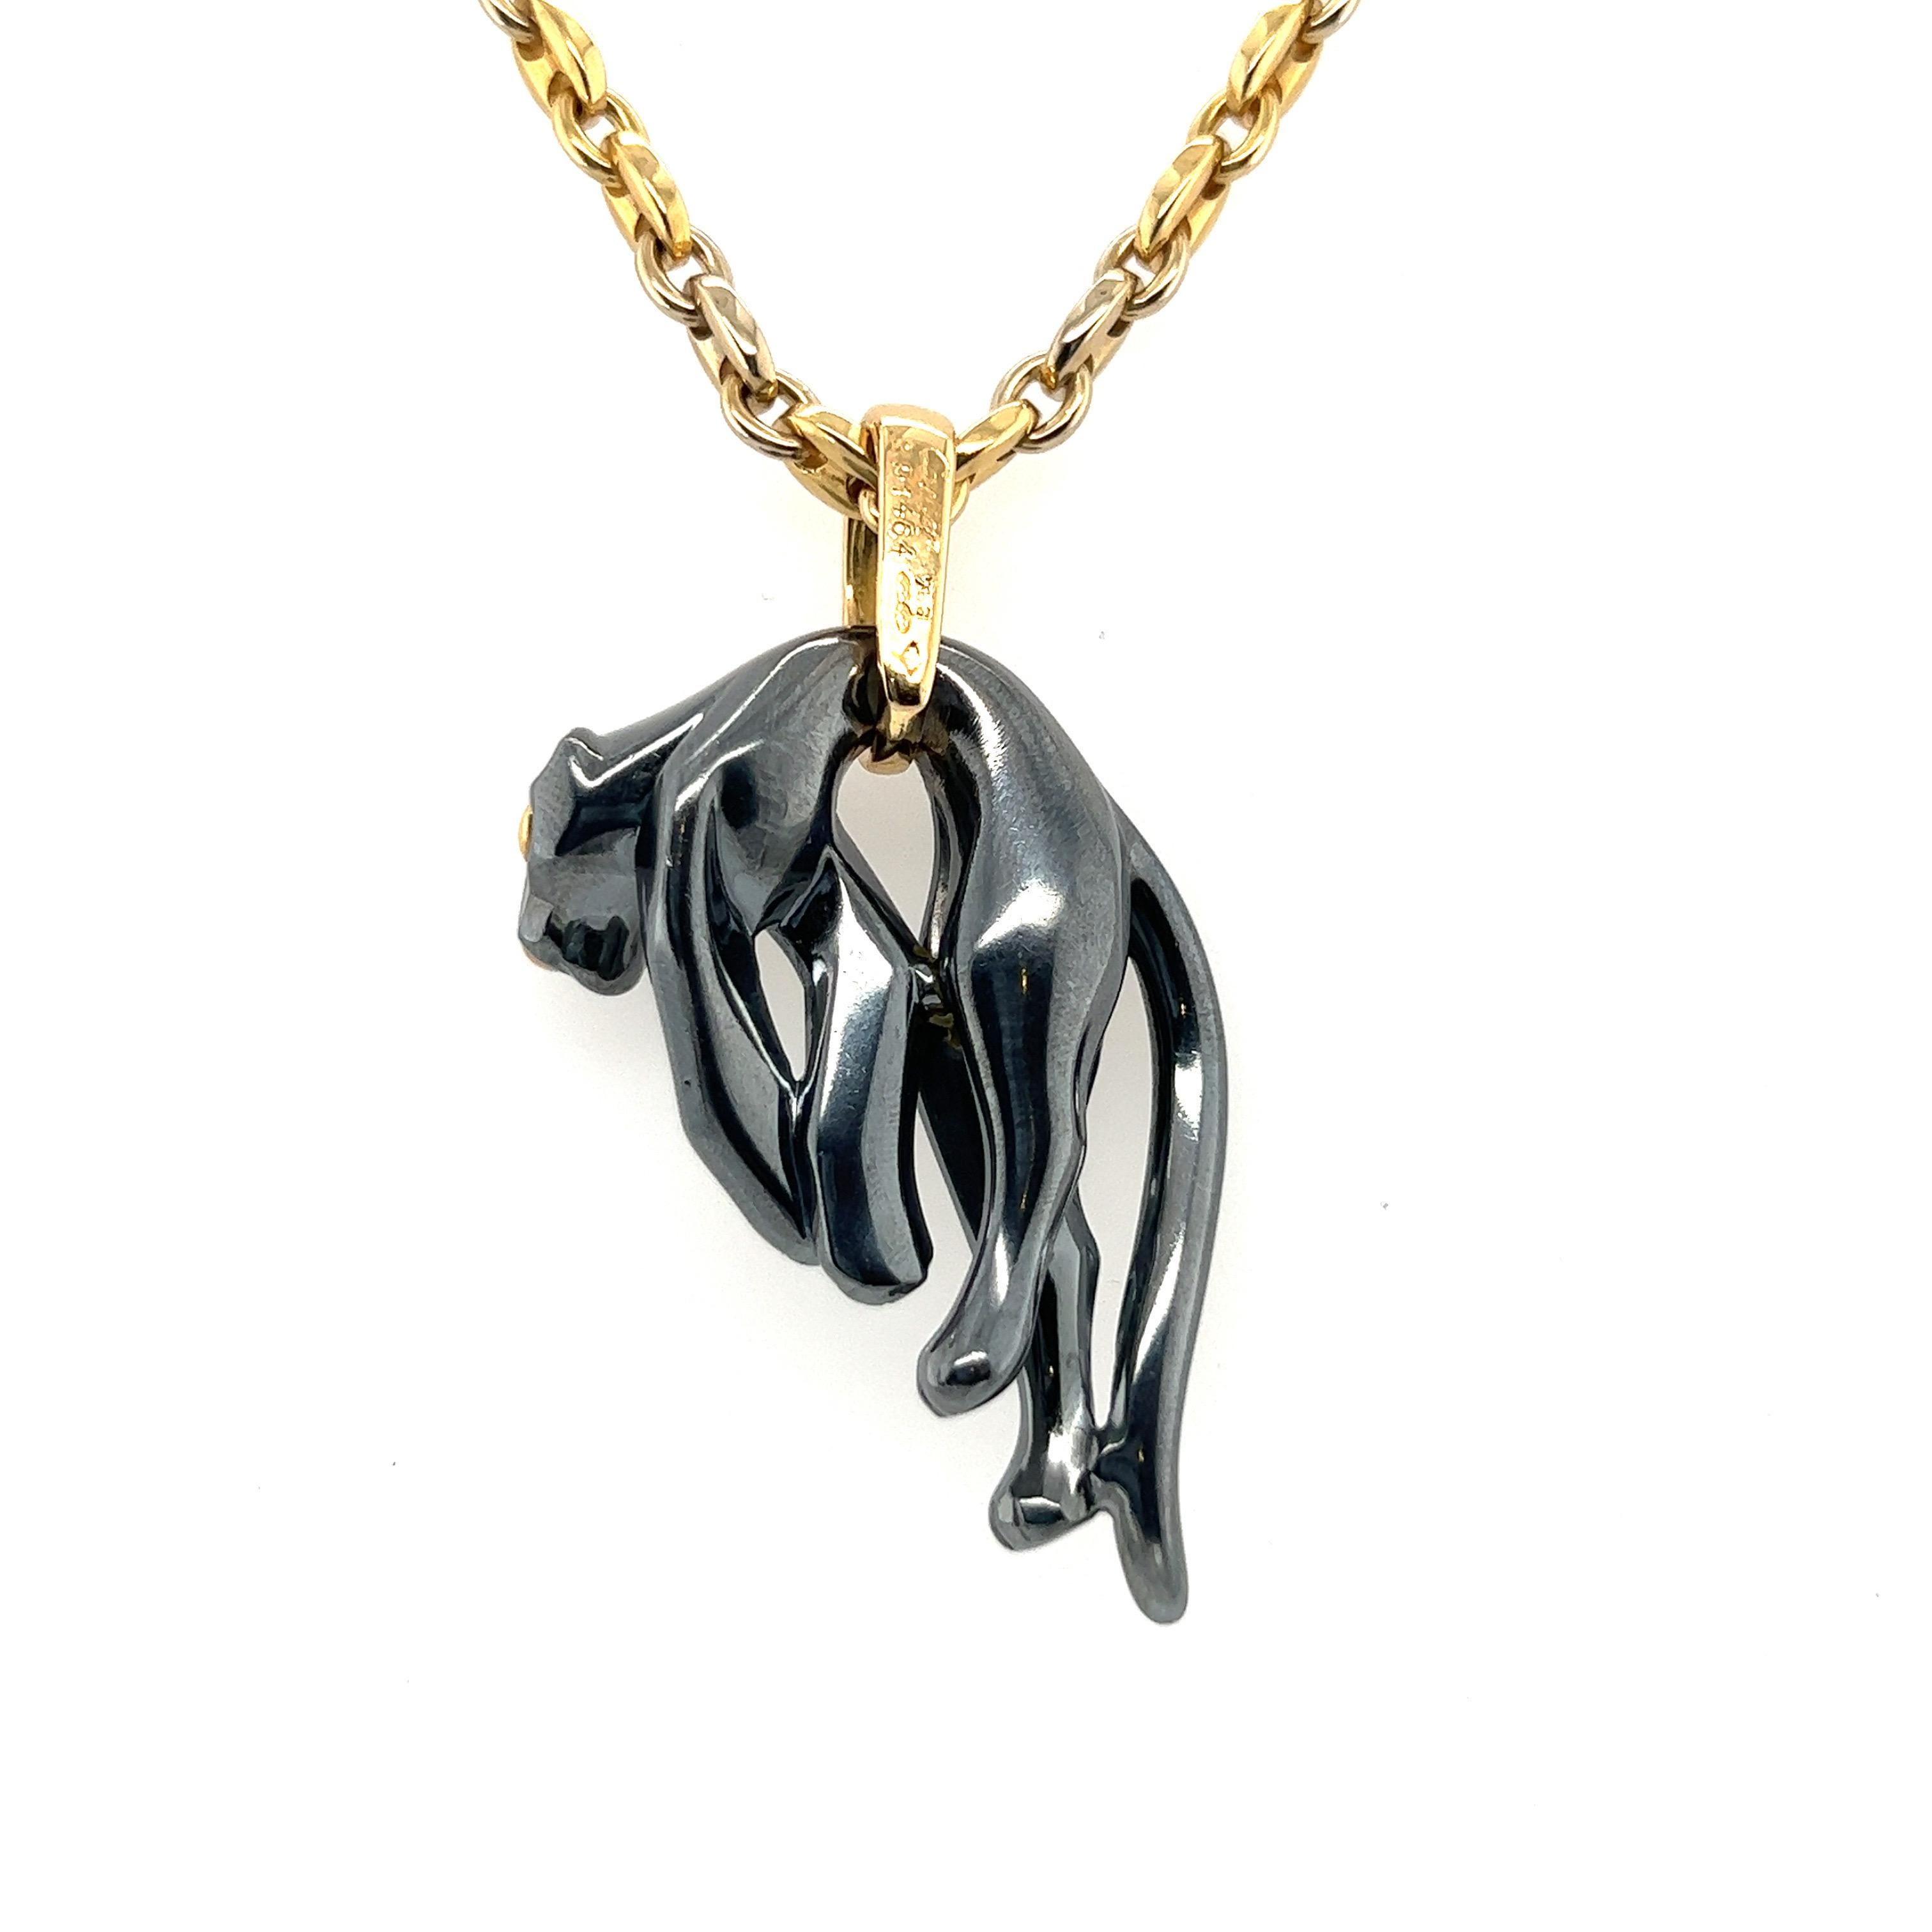 Attractive pendant designed as a sculpted, hanging silverium panther, with polished gold eyes and nose, elegantly suspended from a yellow gold bail. It is accompanied by a chic 18 karat yellow gold Gucci chain necklace of circa 46 cm (18.11